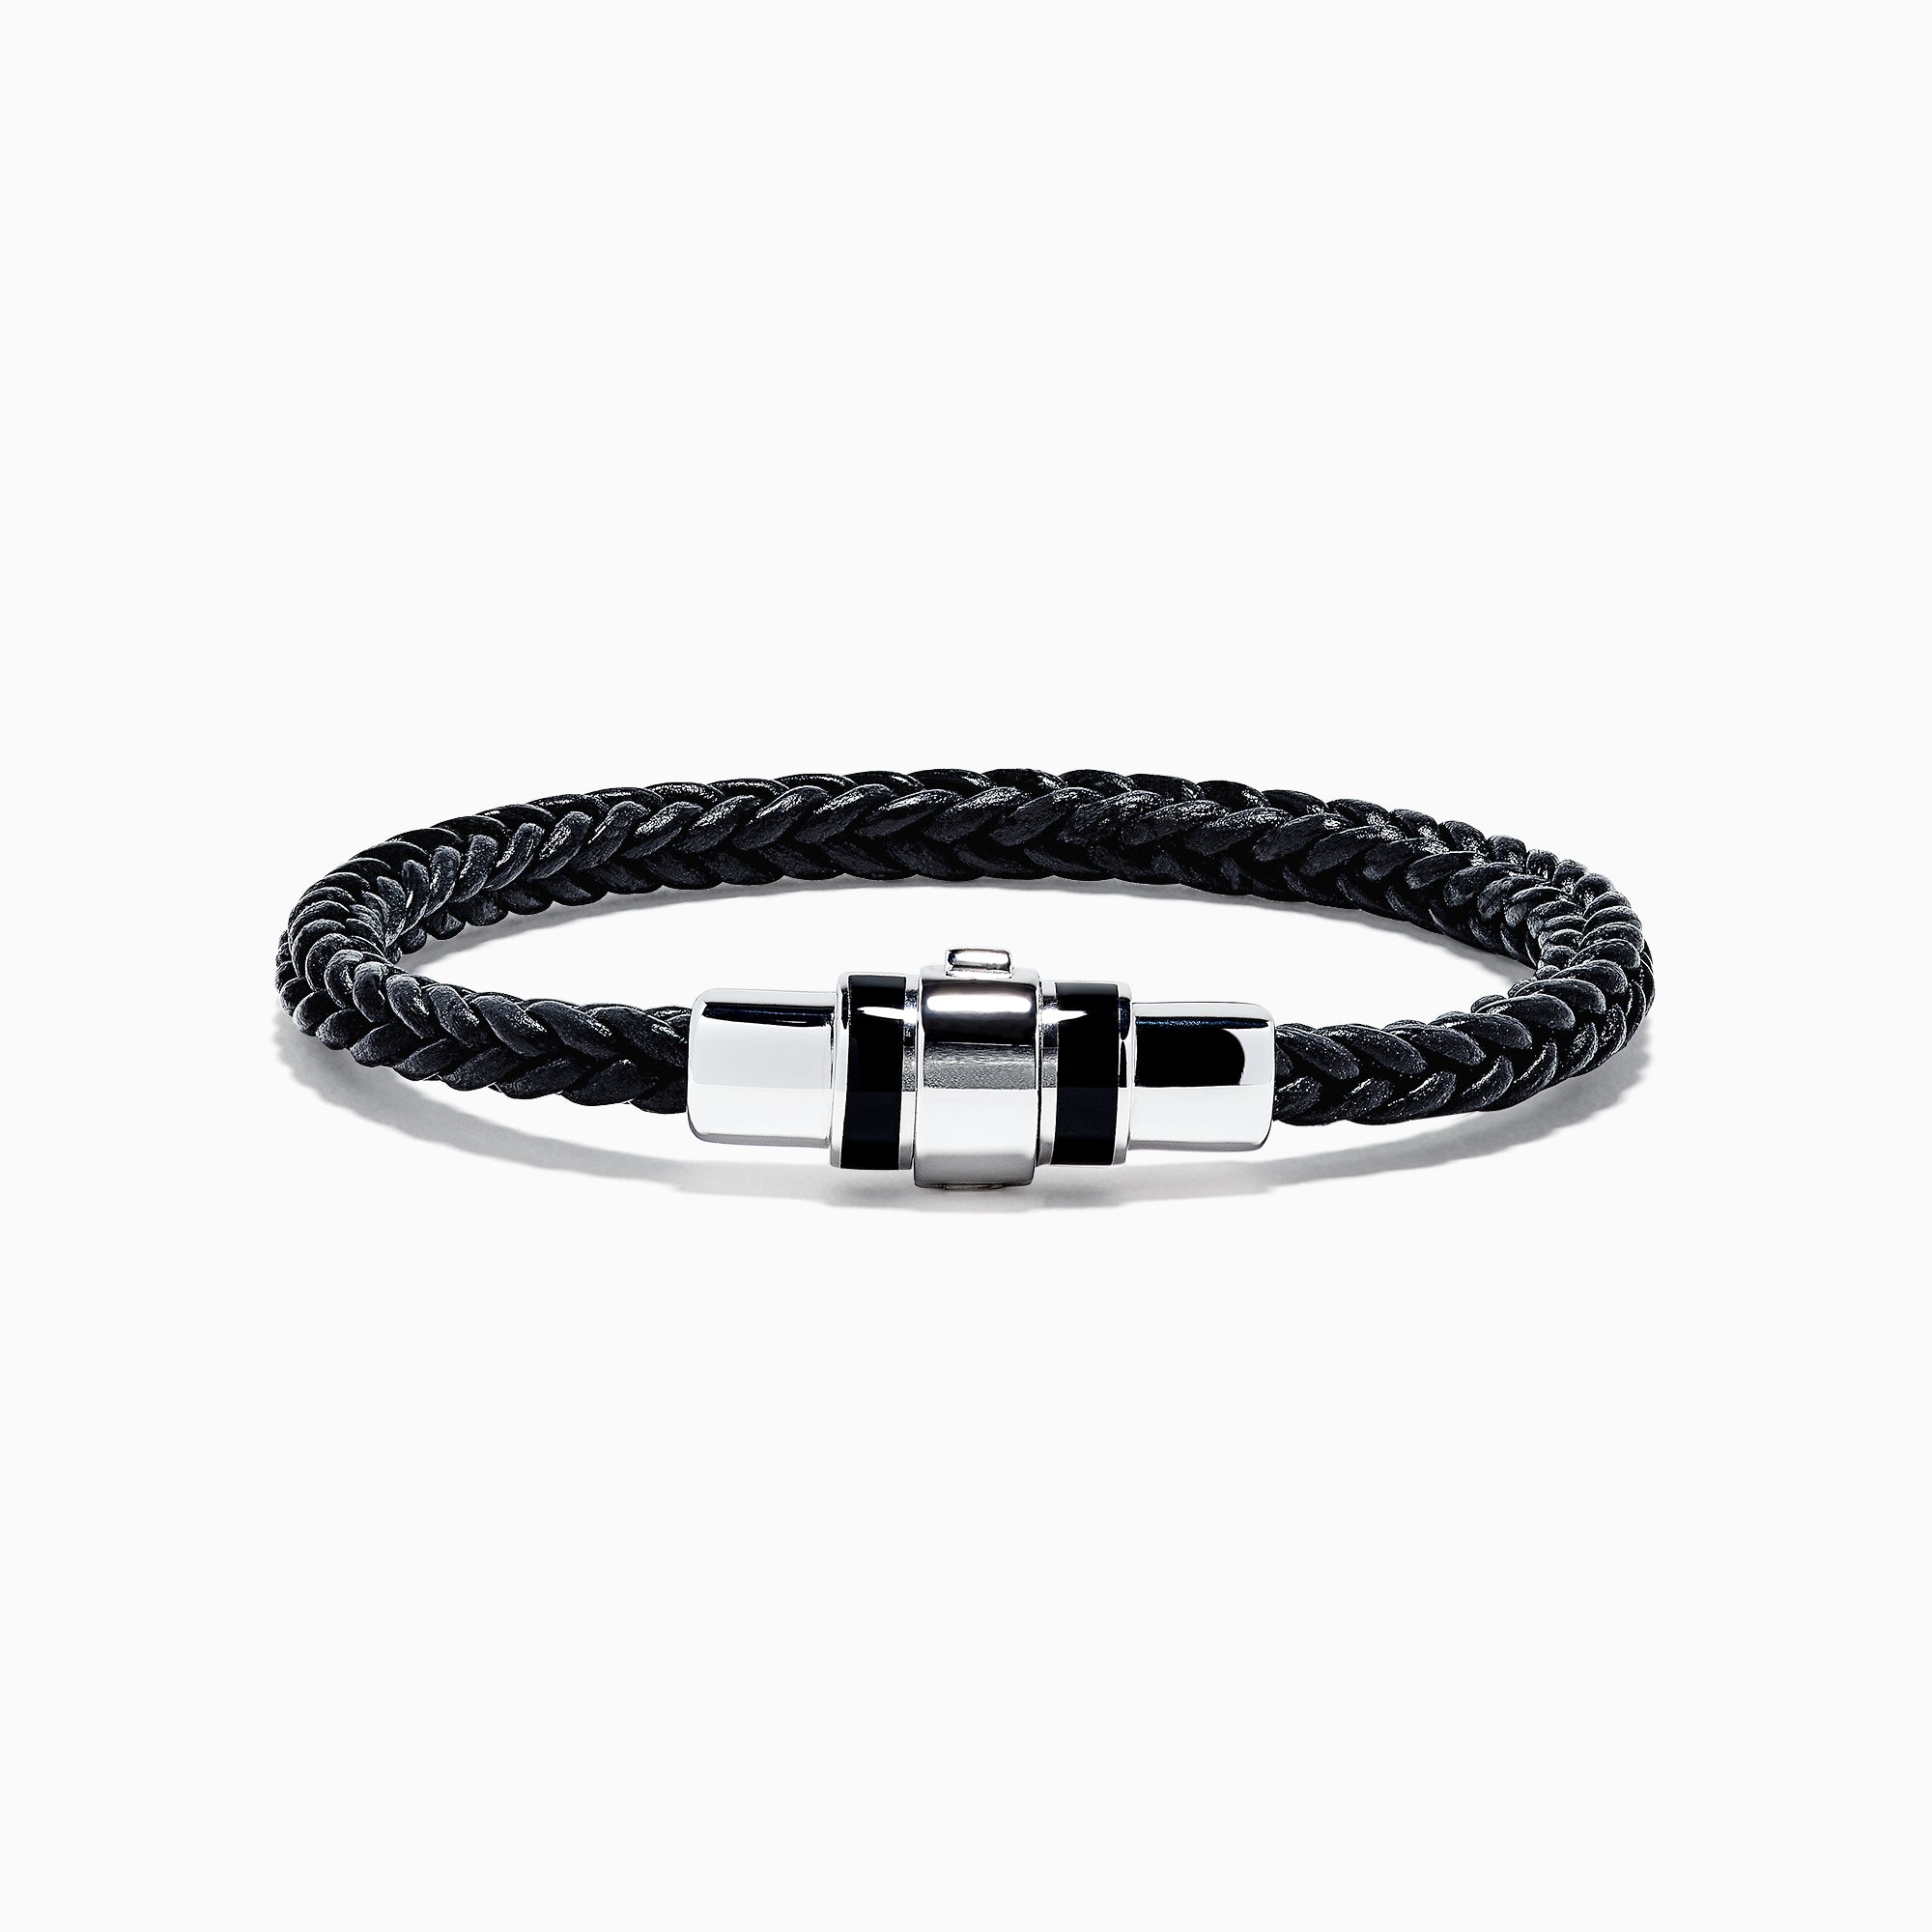 Men's Black Leather Bracelet with Silver Anchor – Nialaya